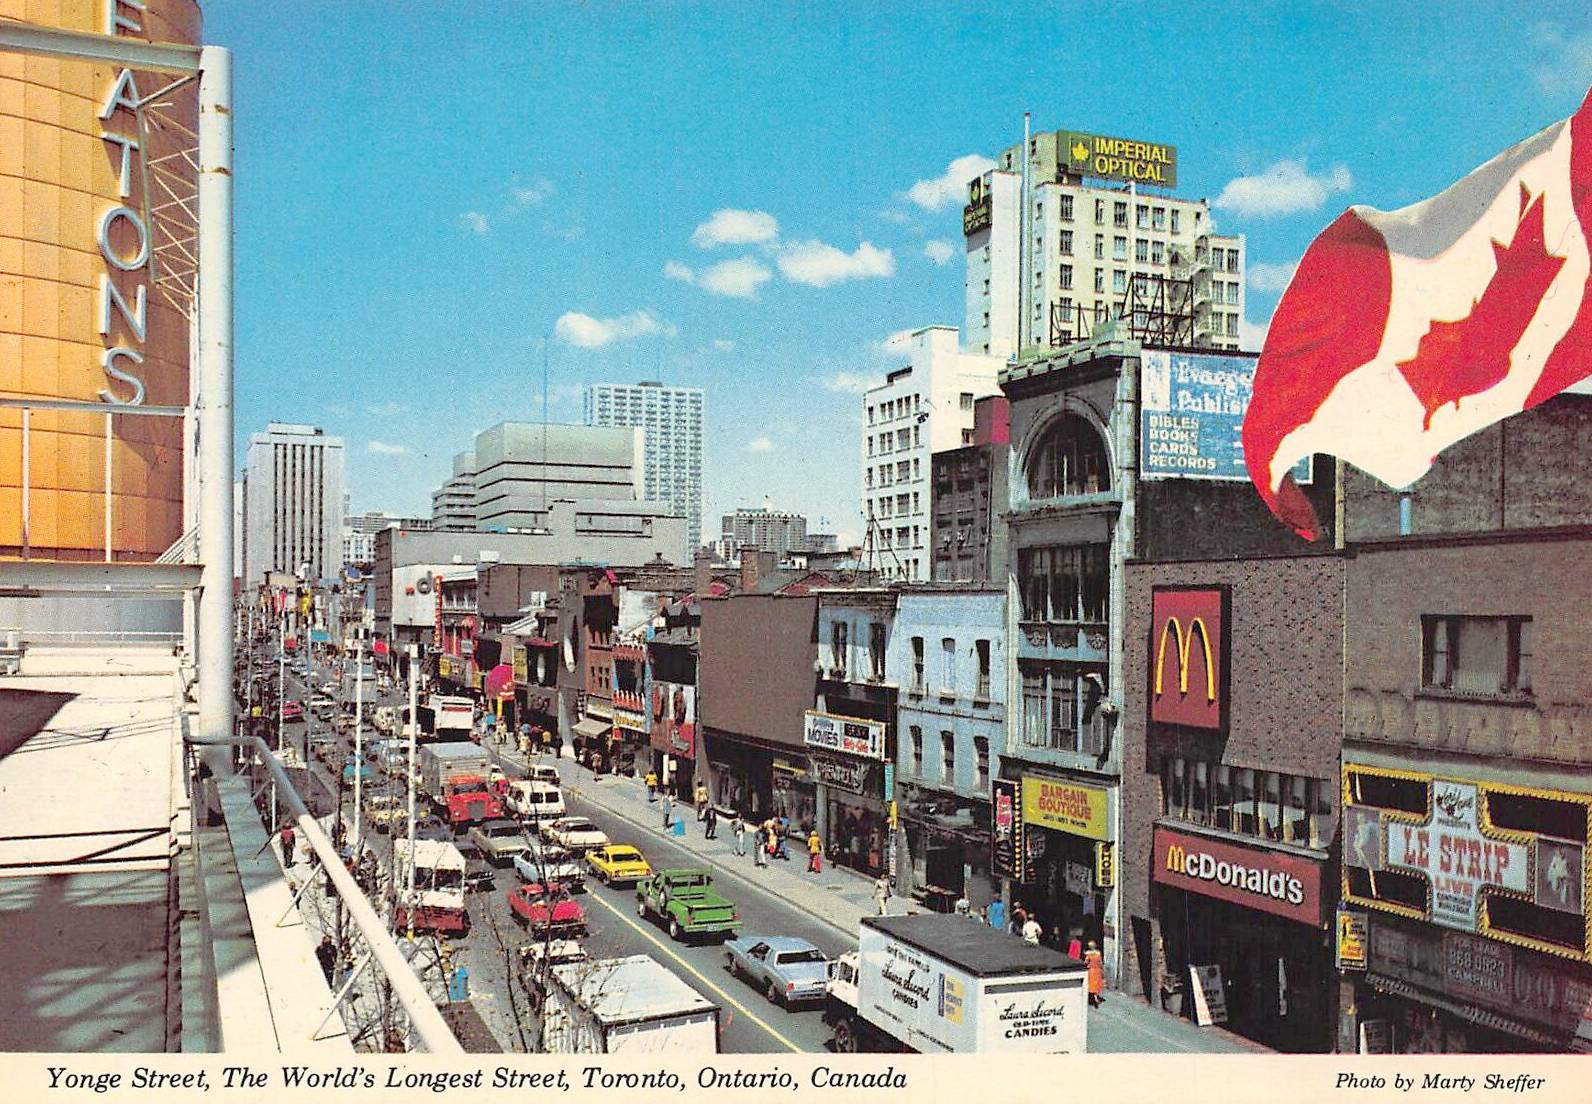 XX POSTCARD - TORONTO - YONGE STREET - AERIAL LOOKING N AND DOWN FROM EATON CENTRE - c1980 - EATON CENTRE OPENED 1977